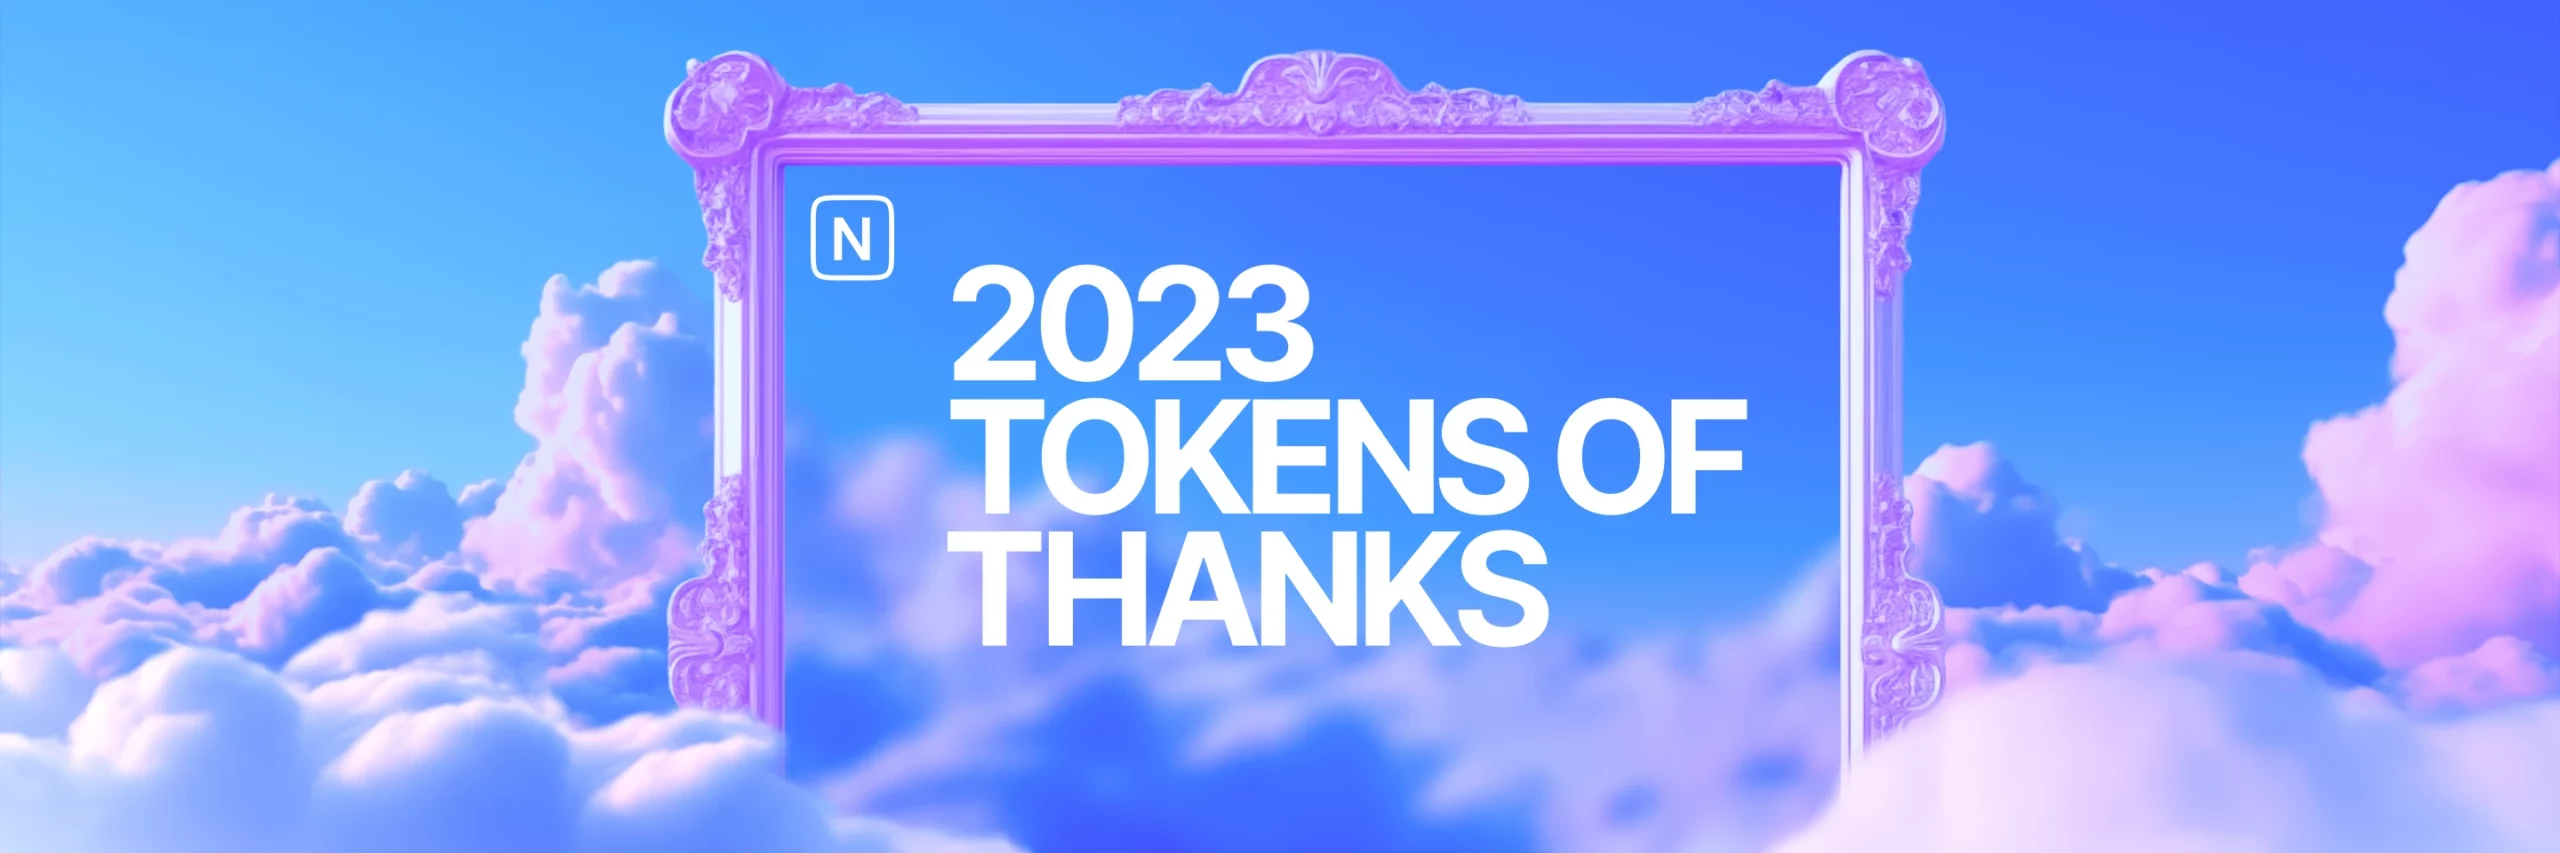 Celebrating Nifty Gateway’s “Tokens of Thanks” 2023: A Grand End-of-Year Event